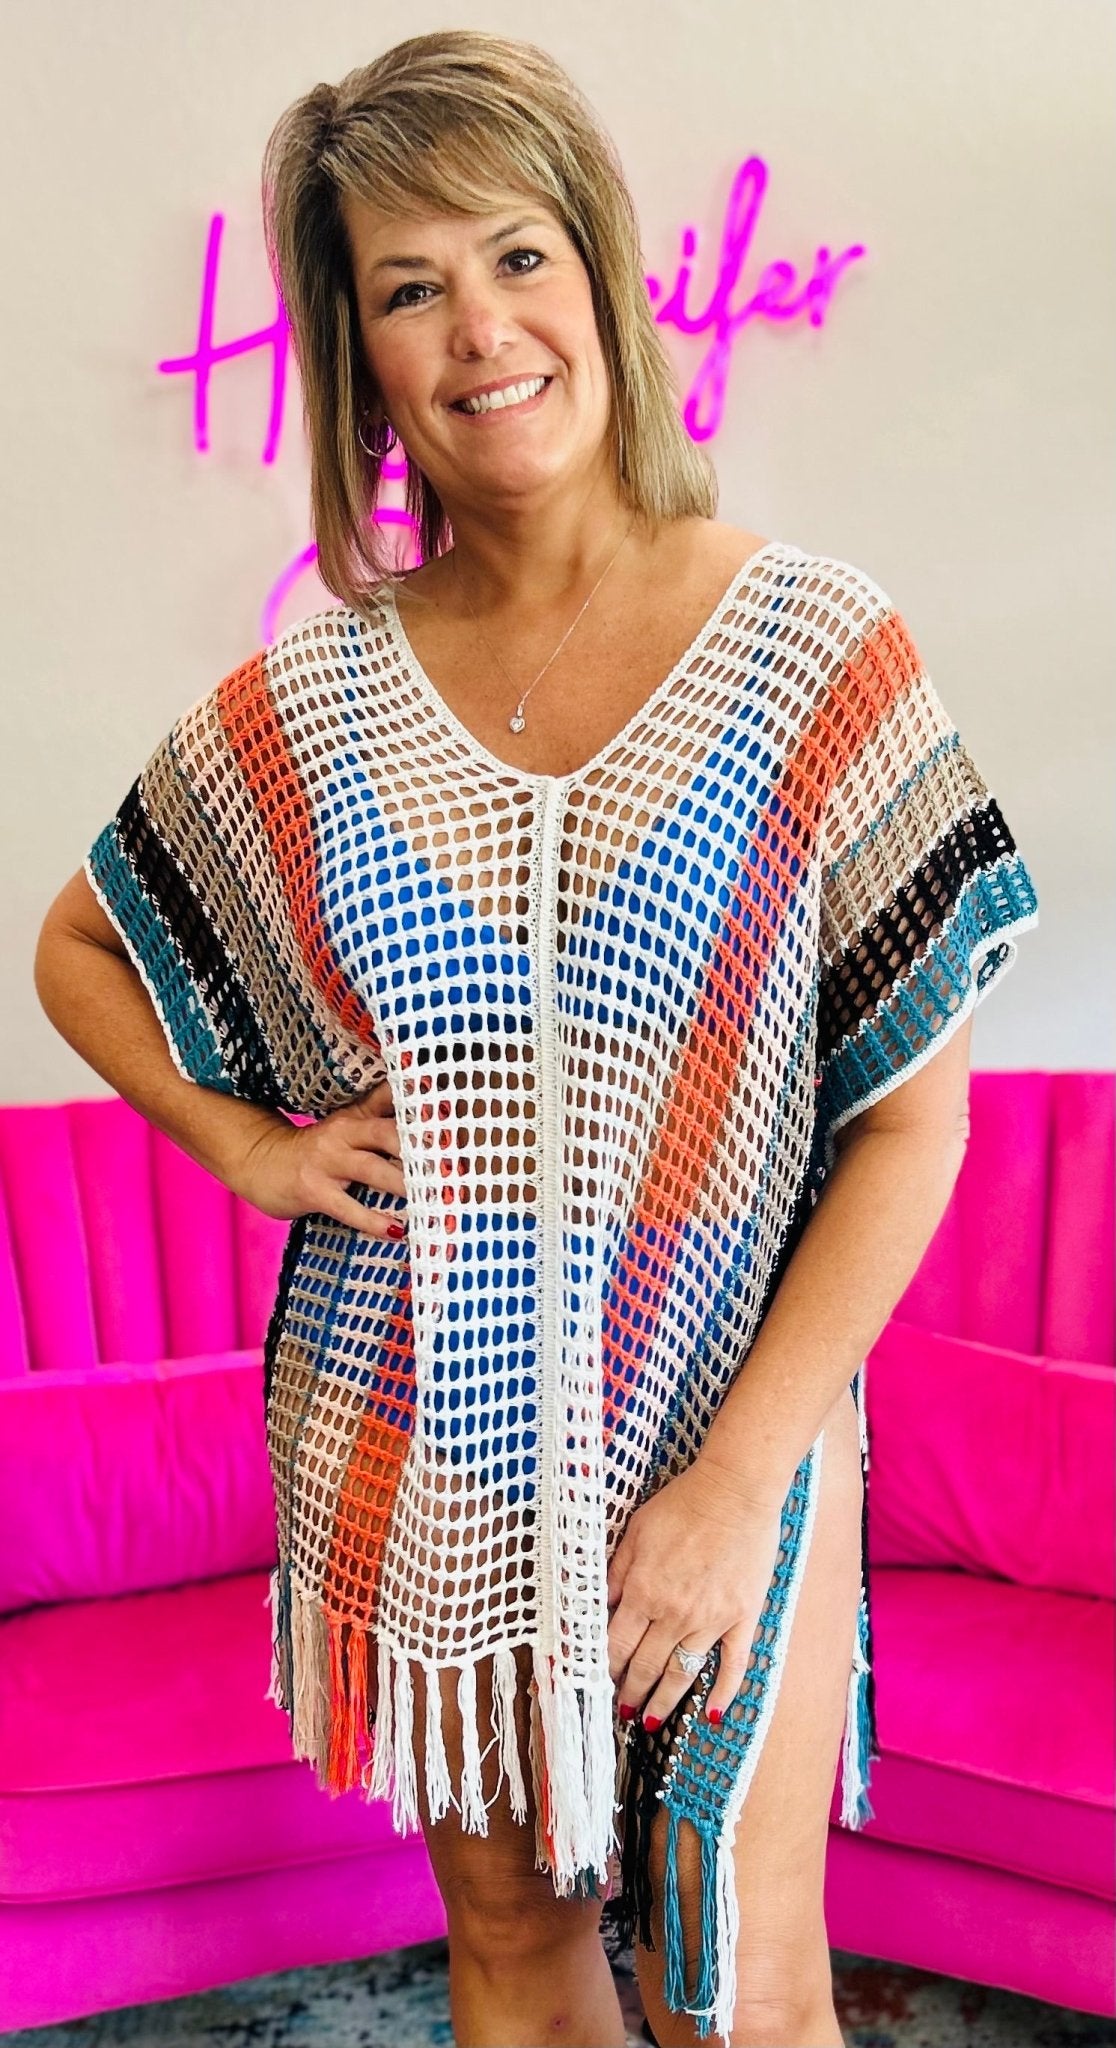 The Crochet Coverup - Hey Heifer Boutique